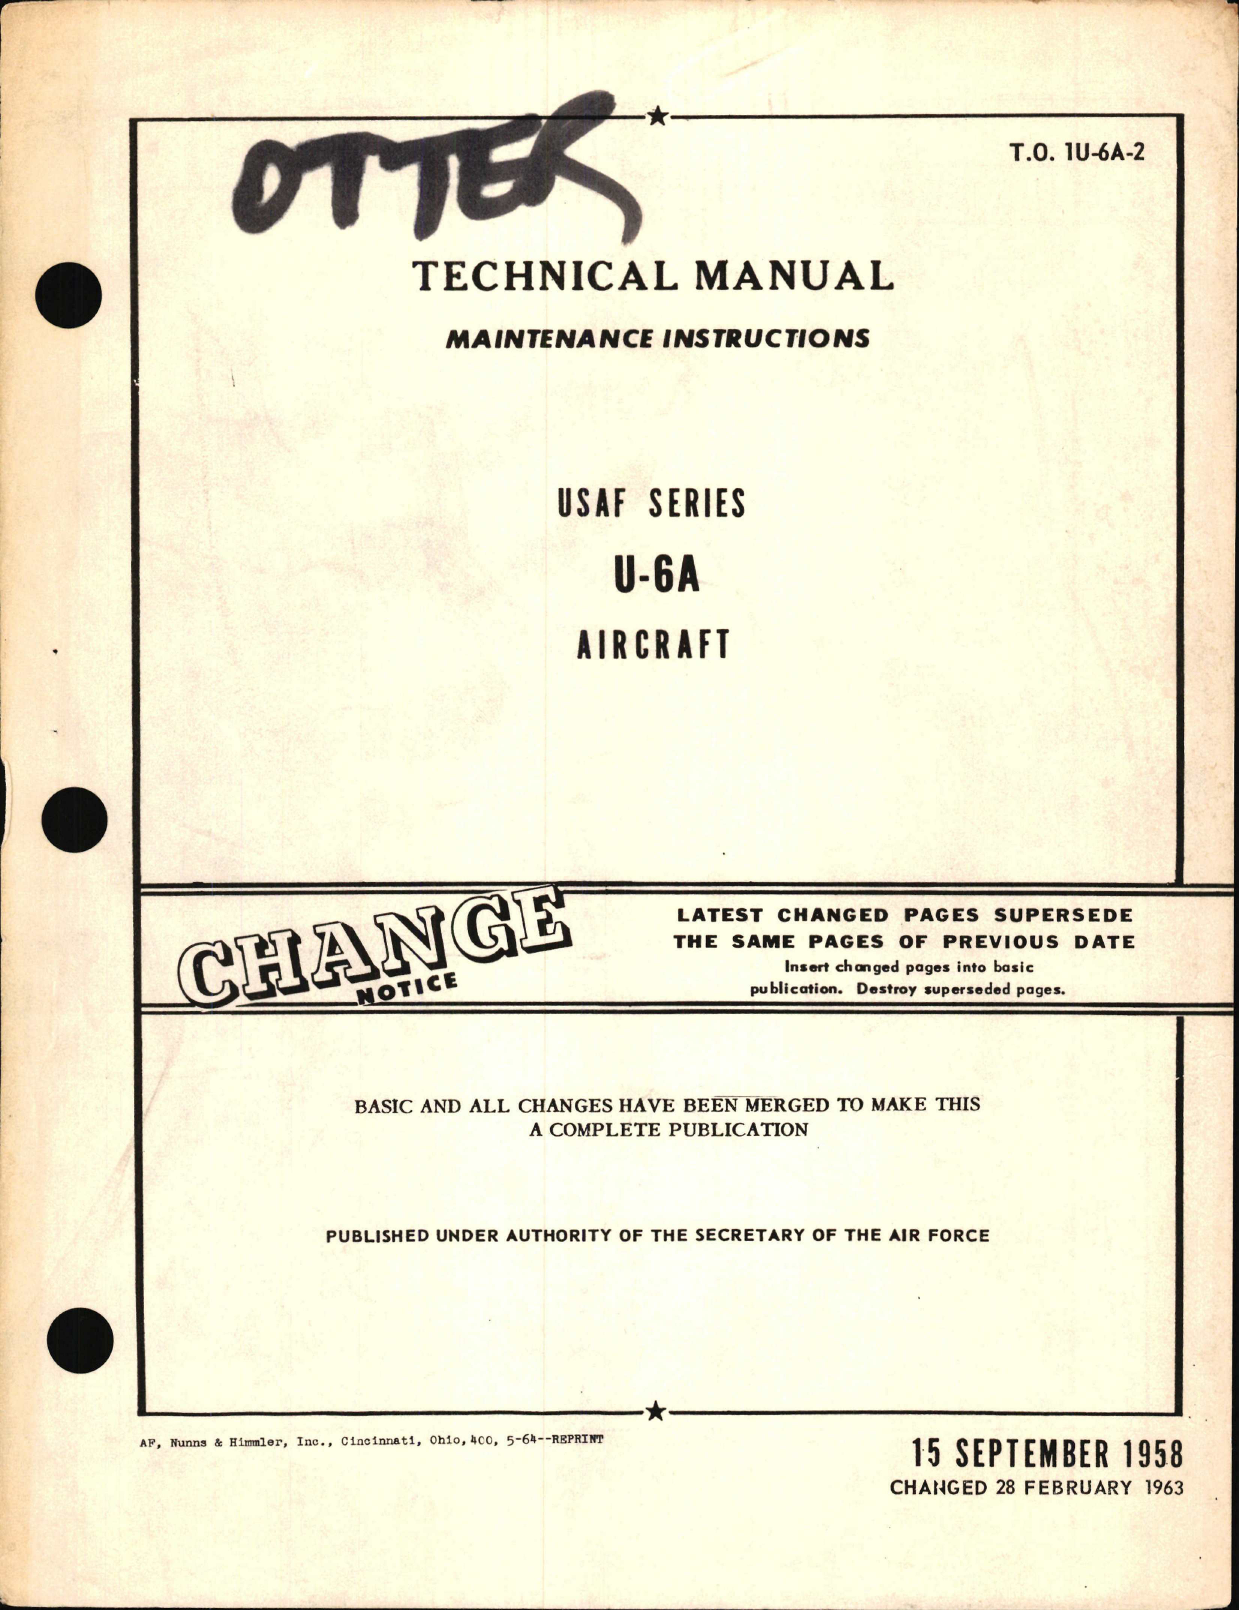 Sample page 1 from AirCorps Library document: Maintenance Instructions for U-6A